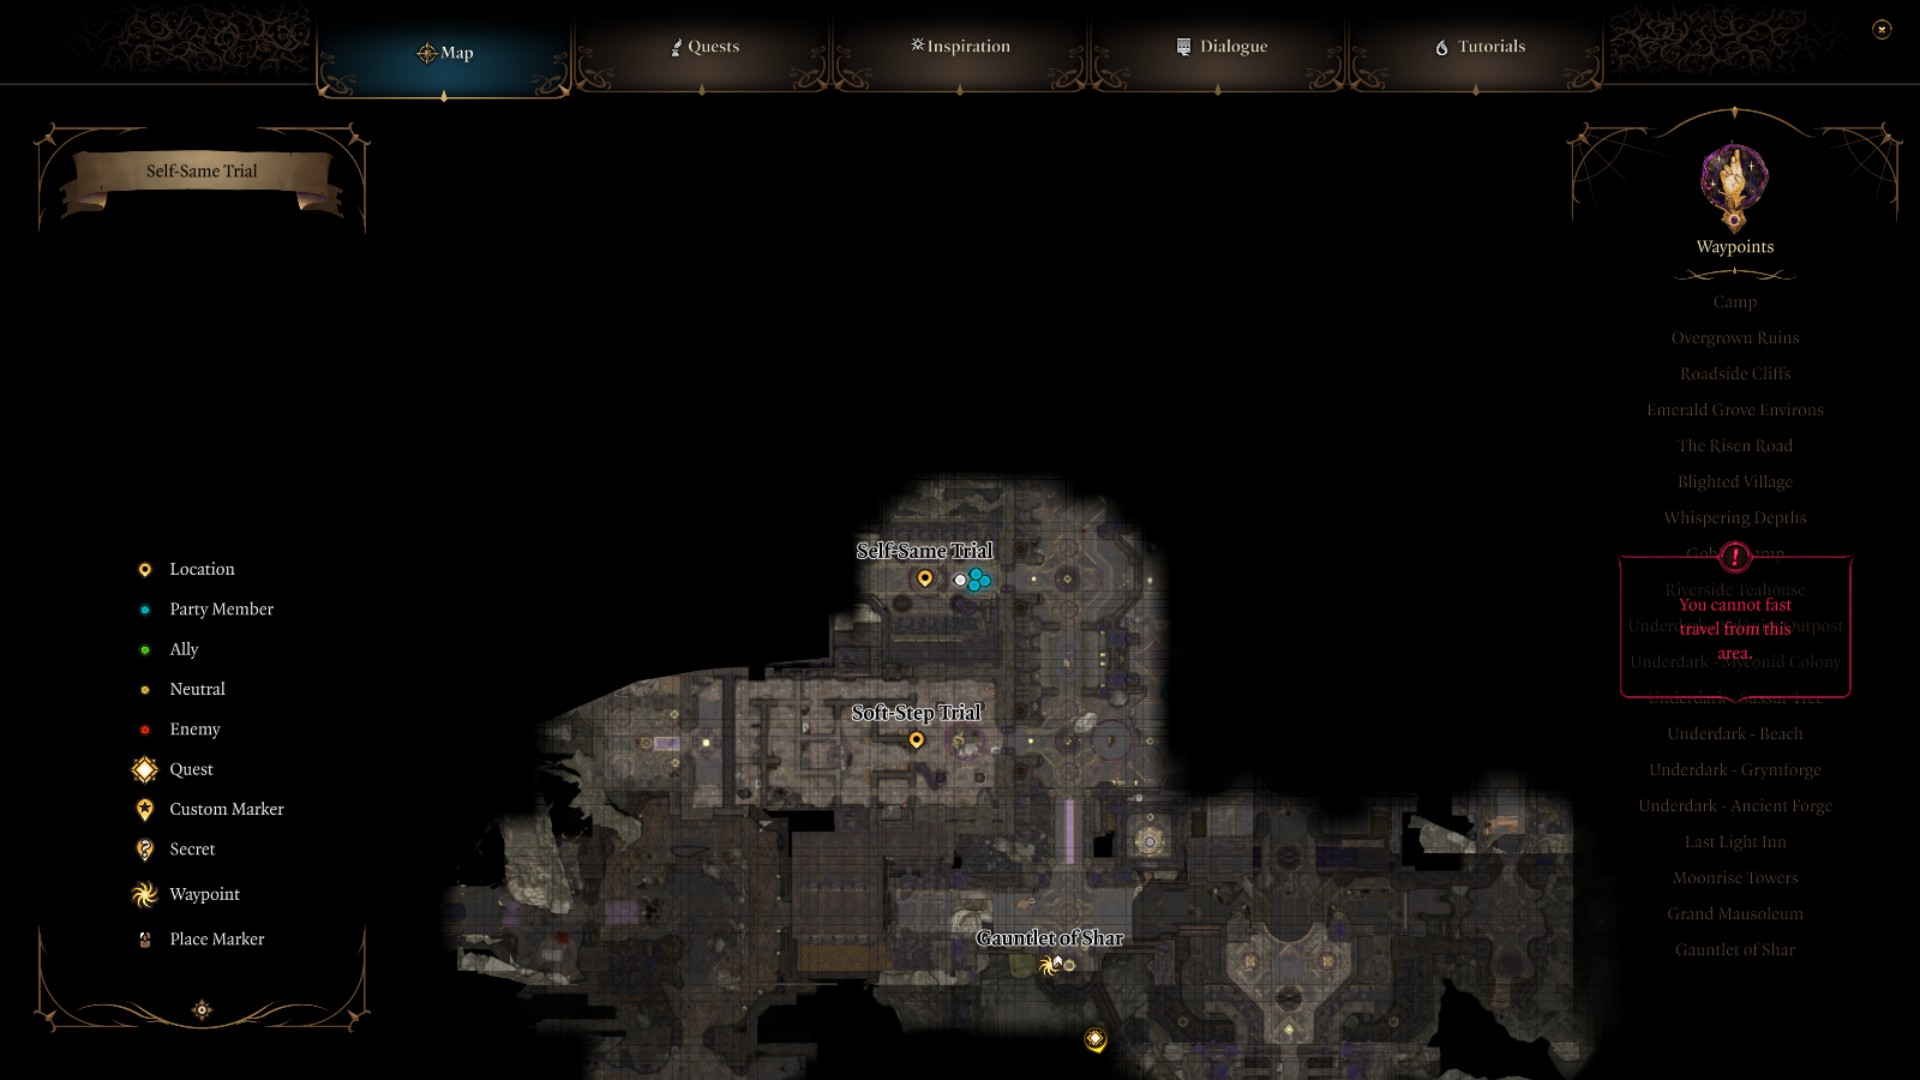 An image of the Self-Same Trial location in Baldur's Gate 3.